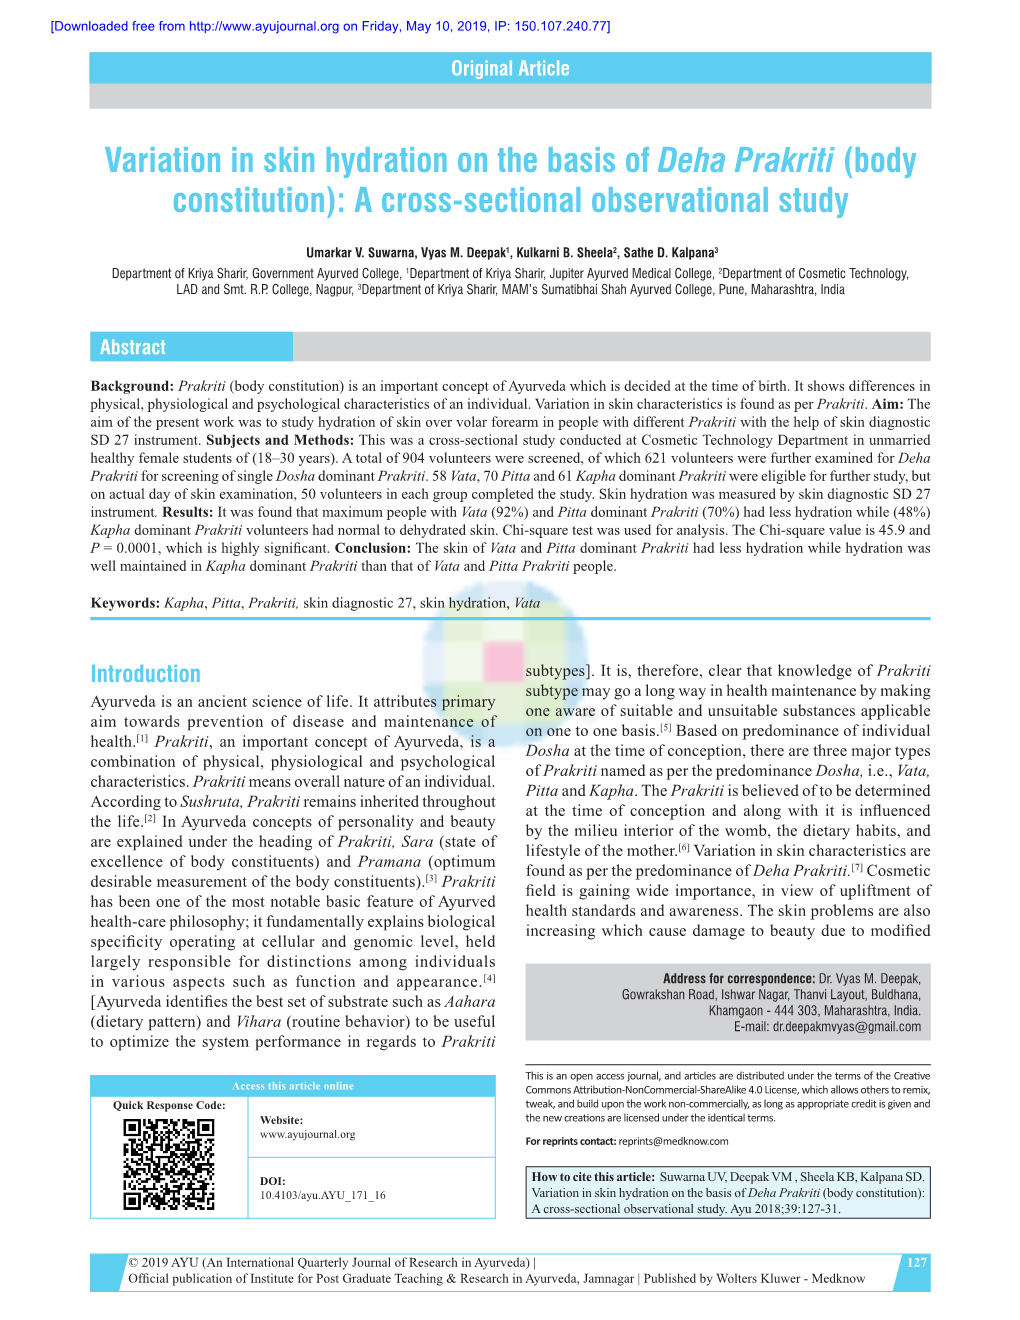 Variation in Skin Hydration on the Basis of Deha Prakriti (Body Constitution): a Cross-Sectional Observational Study